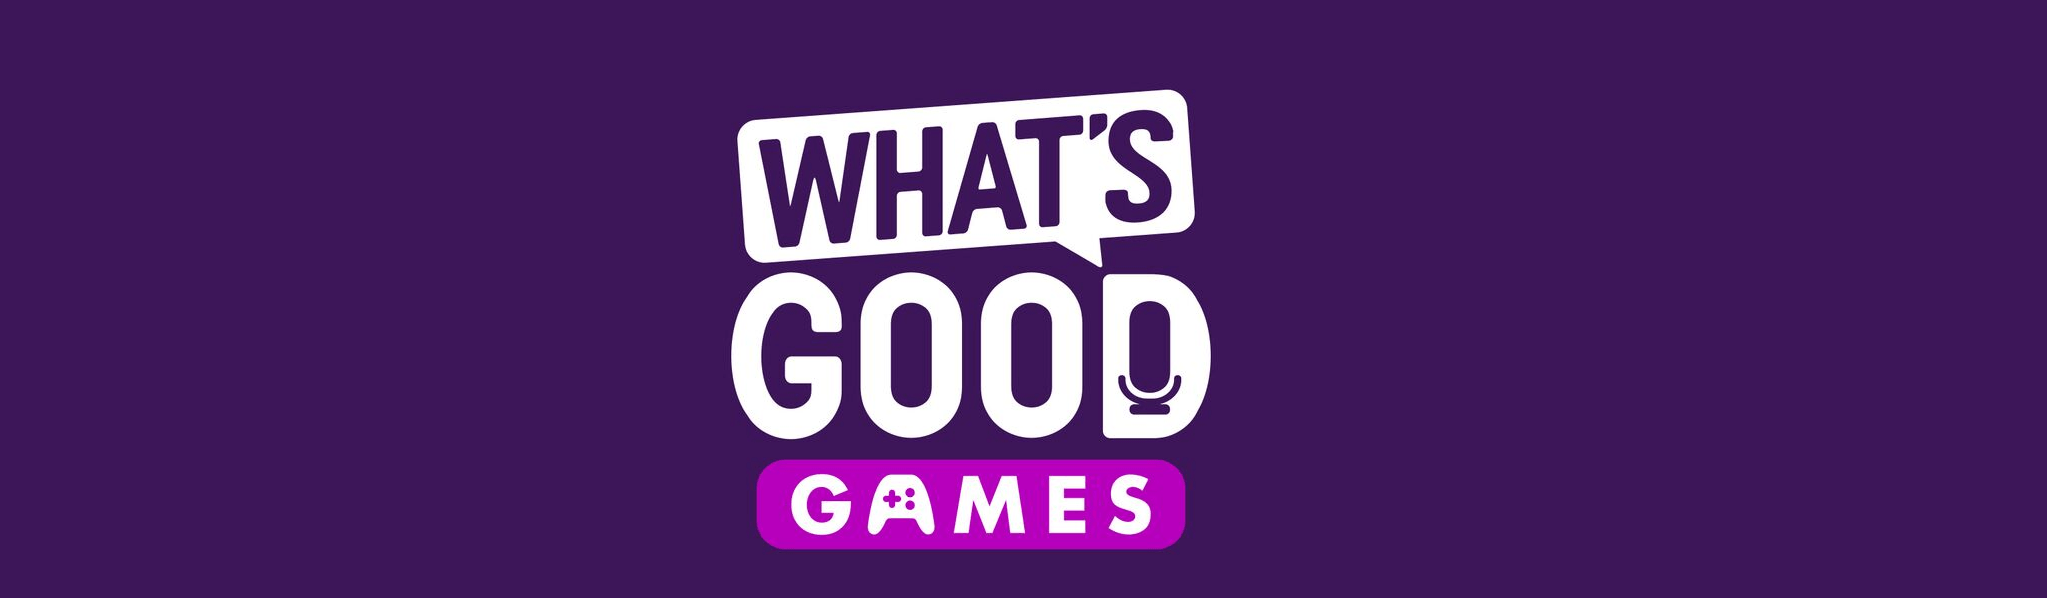 Coolest Gaming Logo - Video Game Podcast. Gaming Podcast. What's Good Games